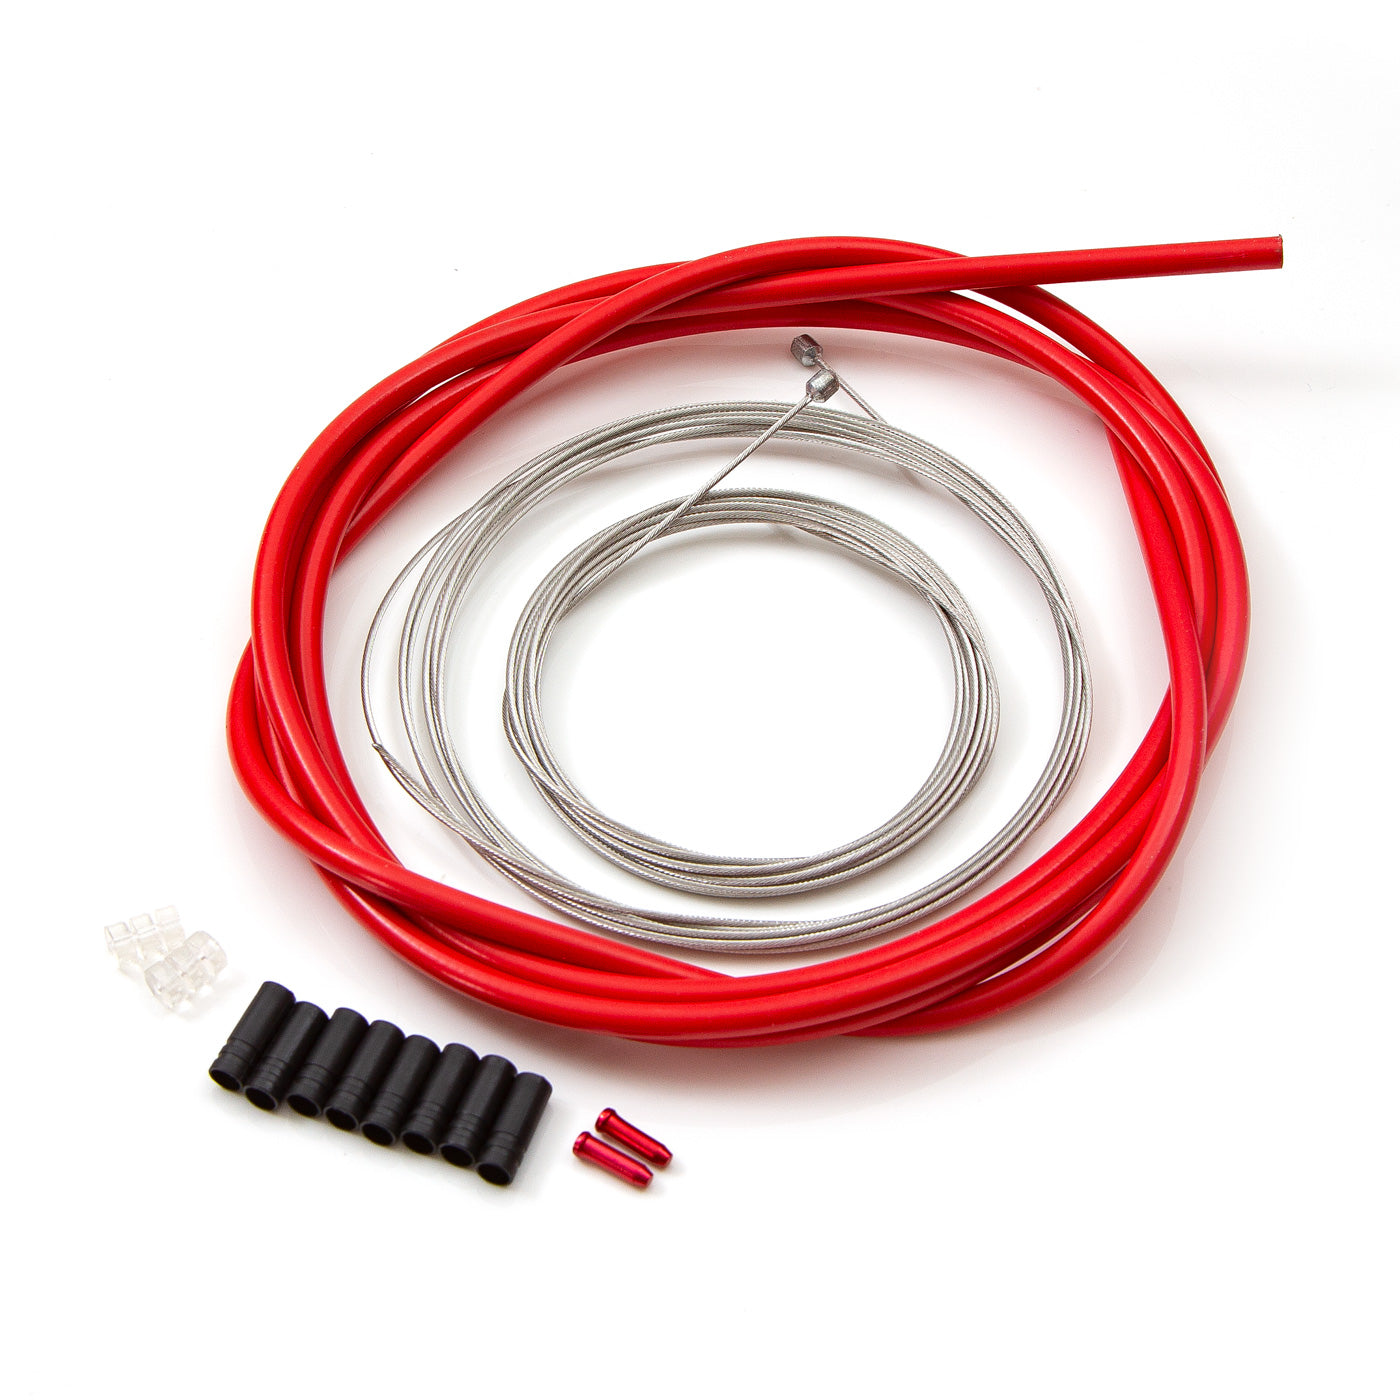 View Stainless Steel Universal Gear Cable Kit Red information